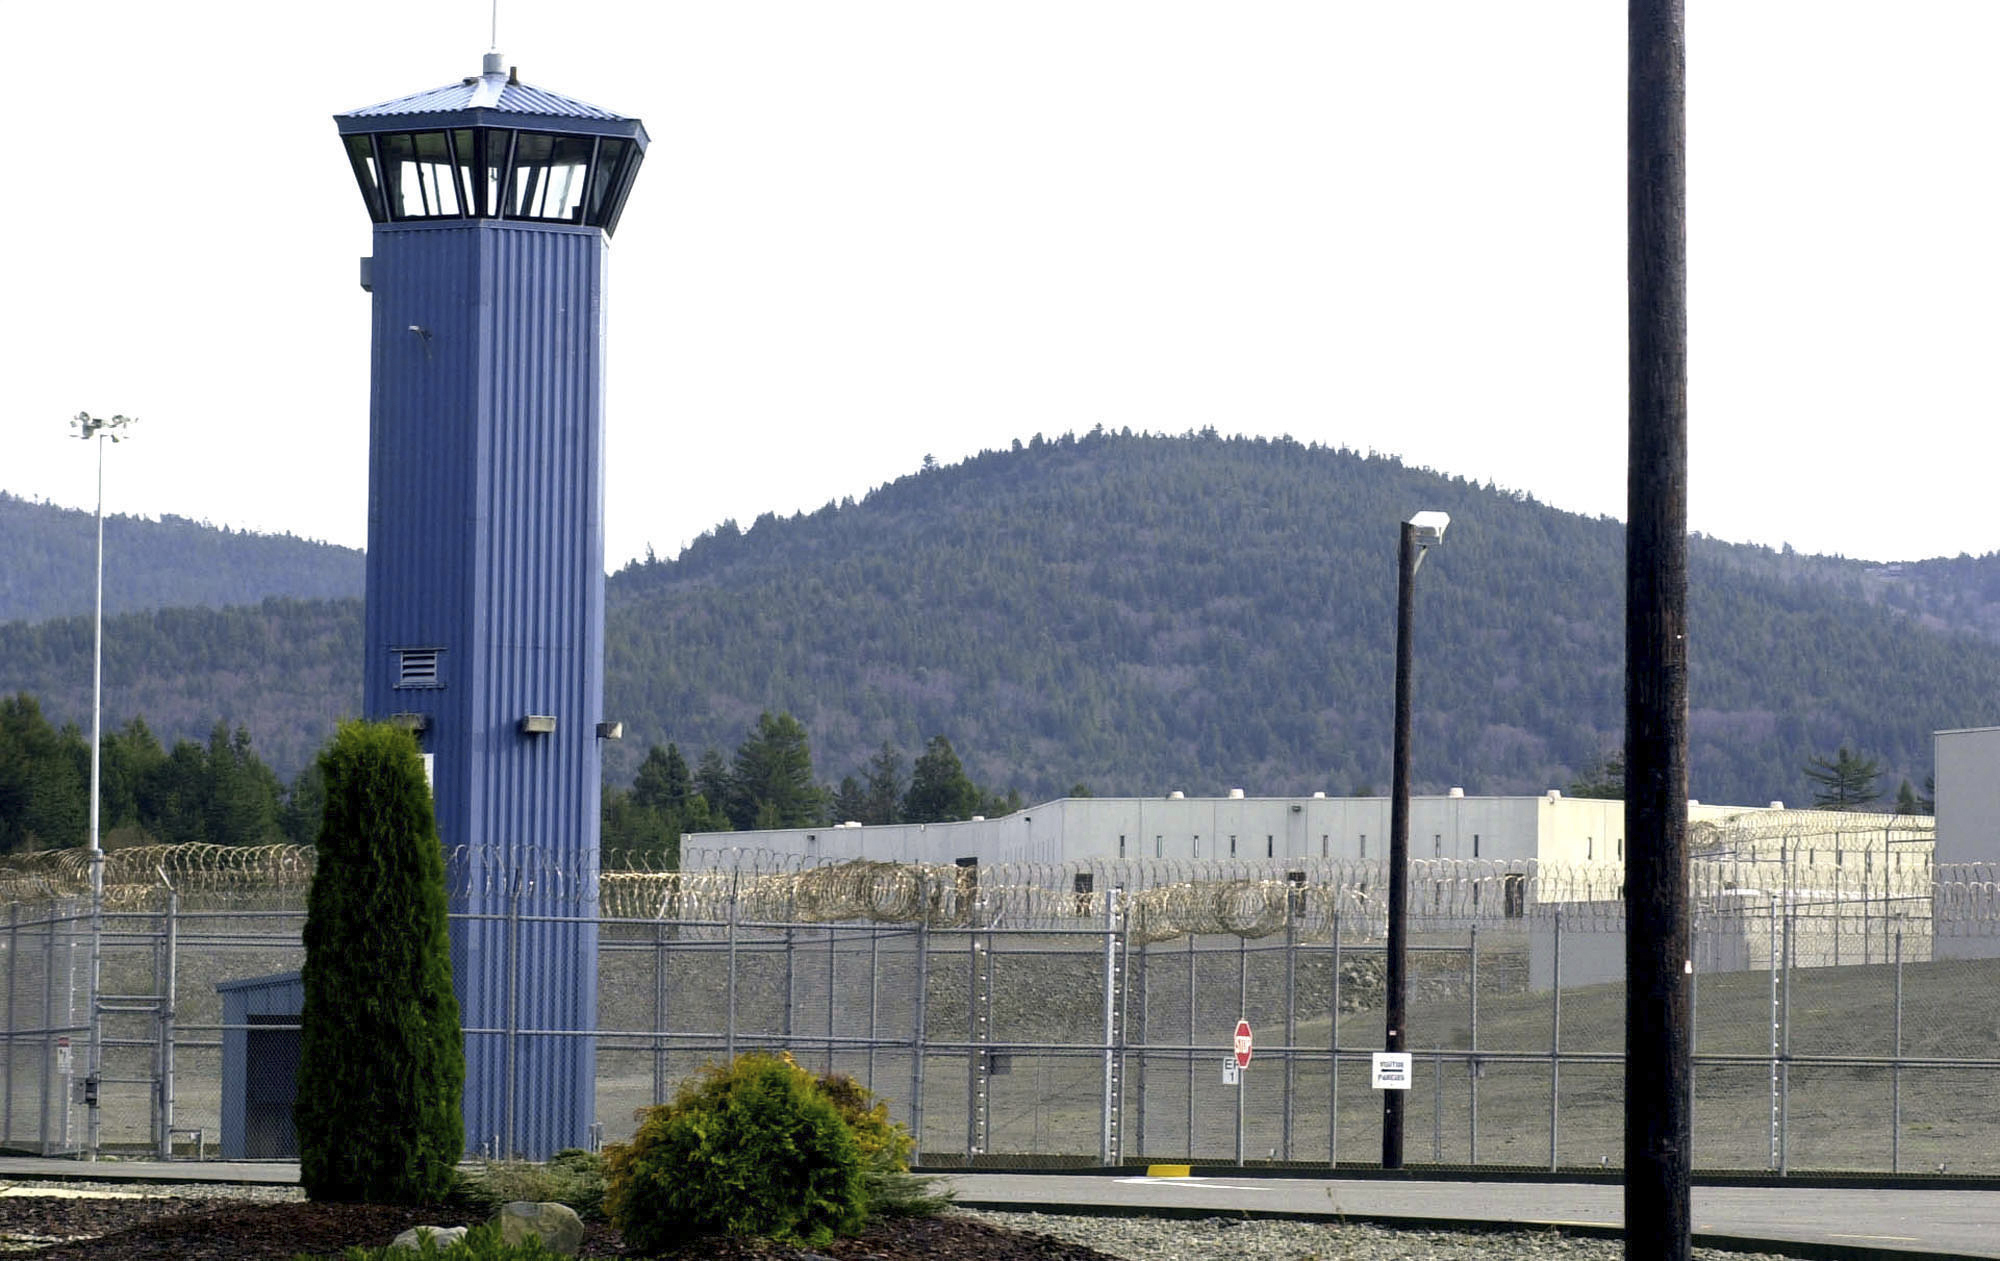 FILE - A tower stands at Pelican Bay State Prison outside of Crescent City, Calif. The Northern Cal...